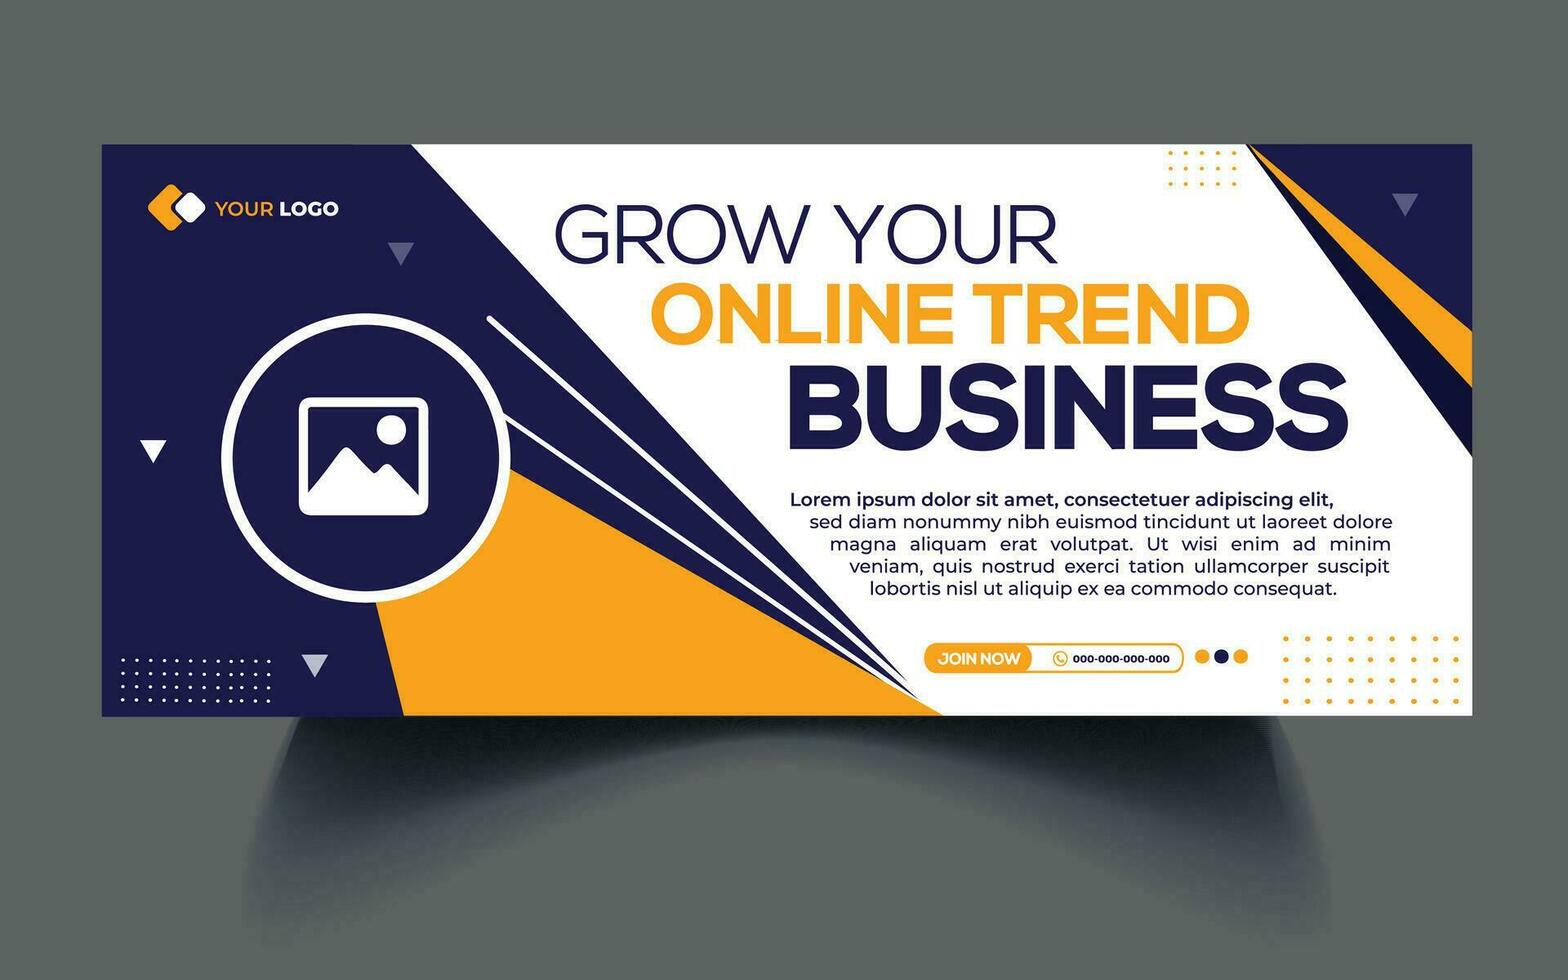 Business sosial media web banner template design background Free Vector